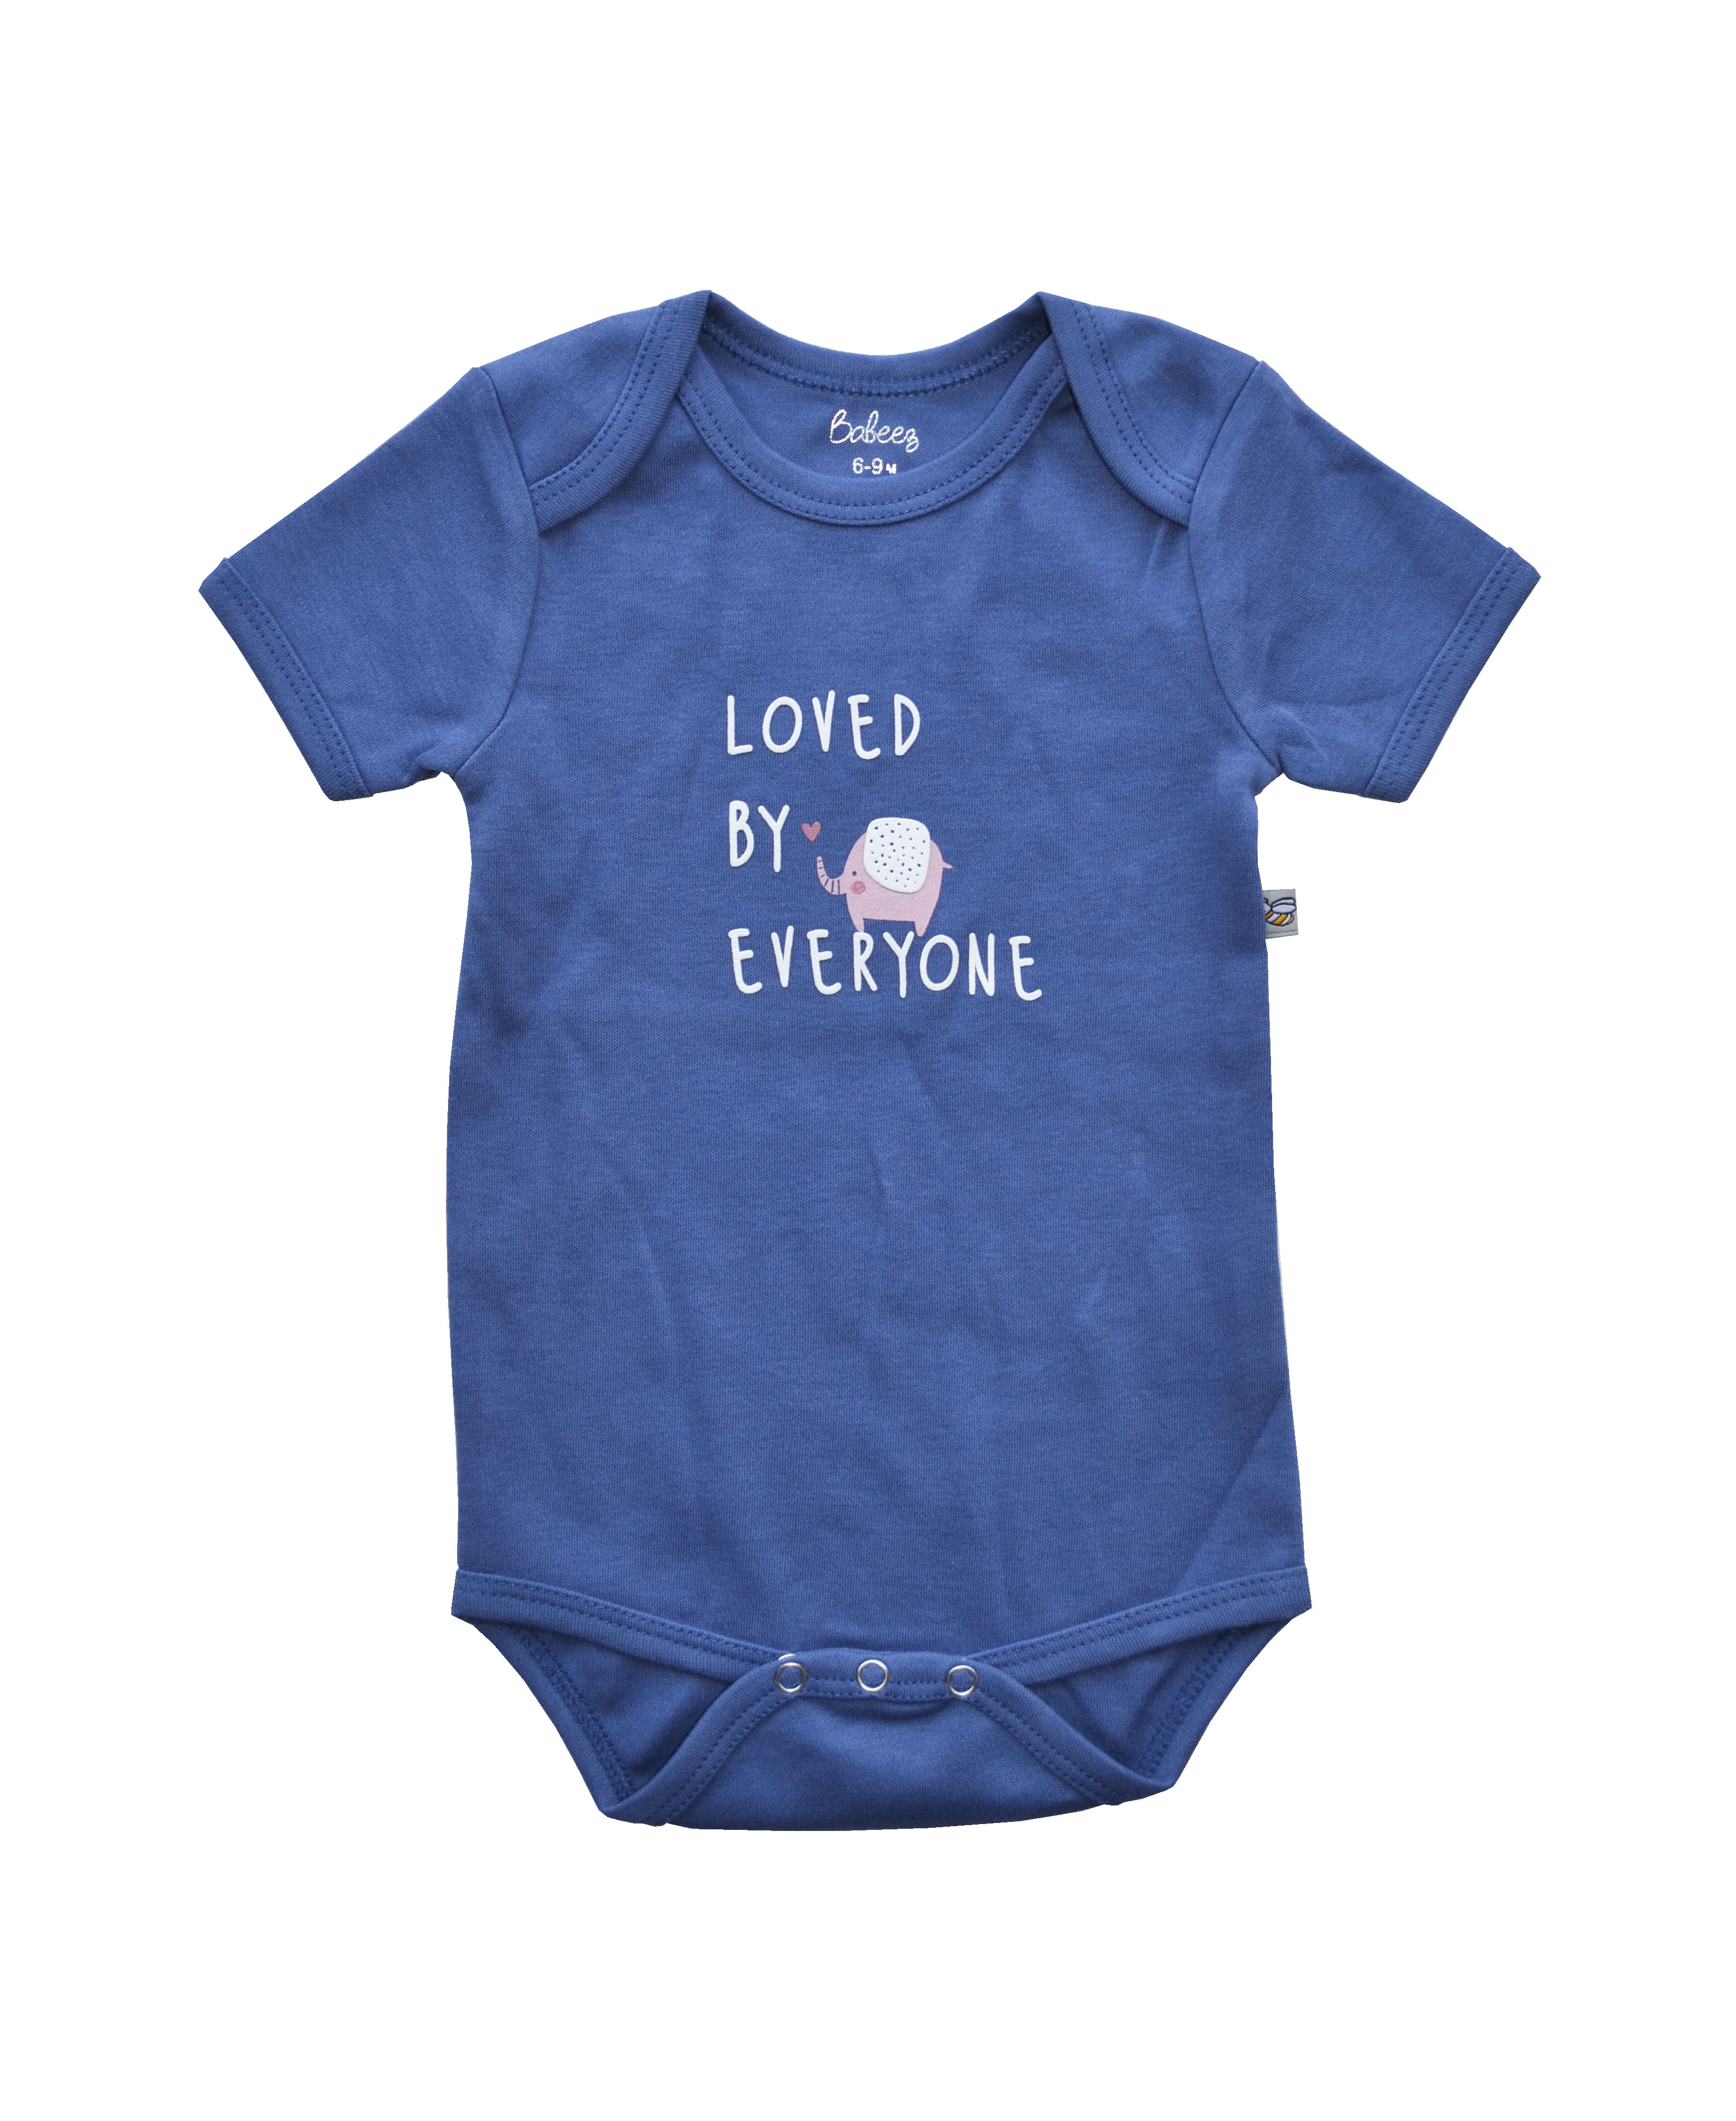 Loved By Everyone Print On Blue Baby Romper/Onesie(100% Cotton)